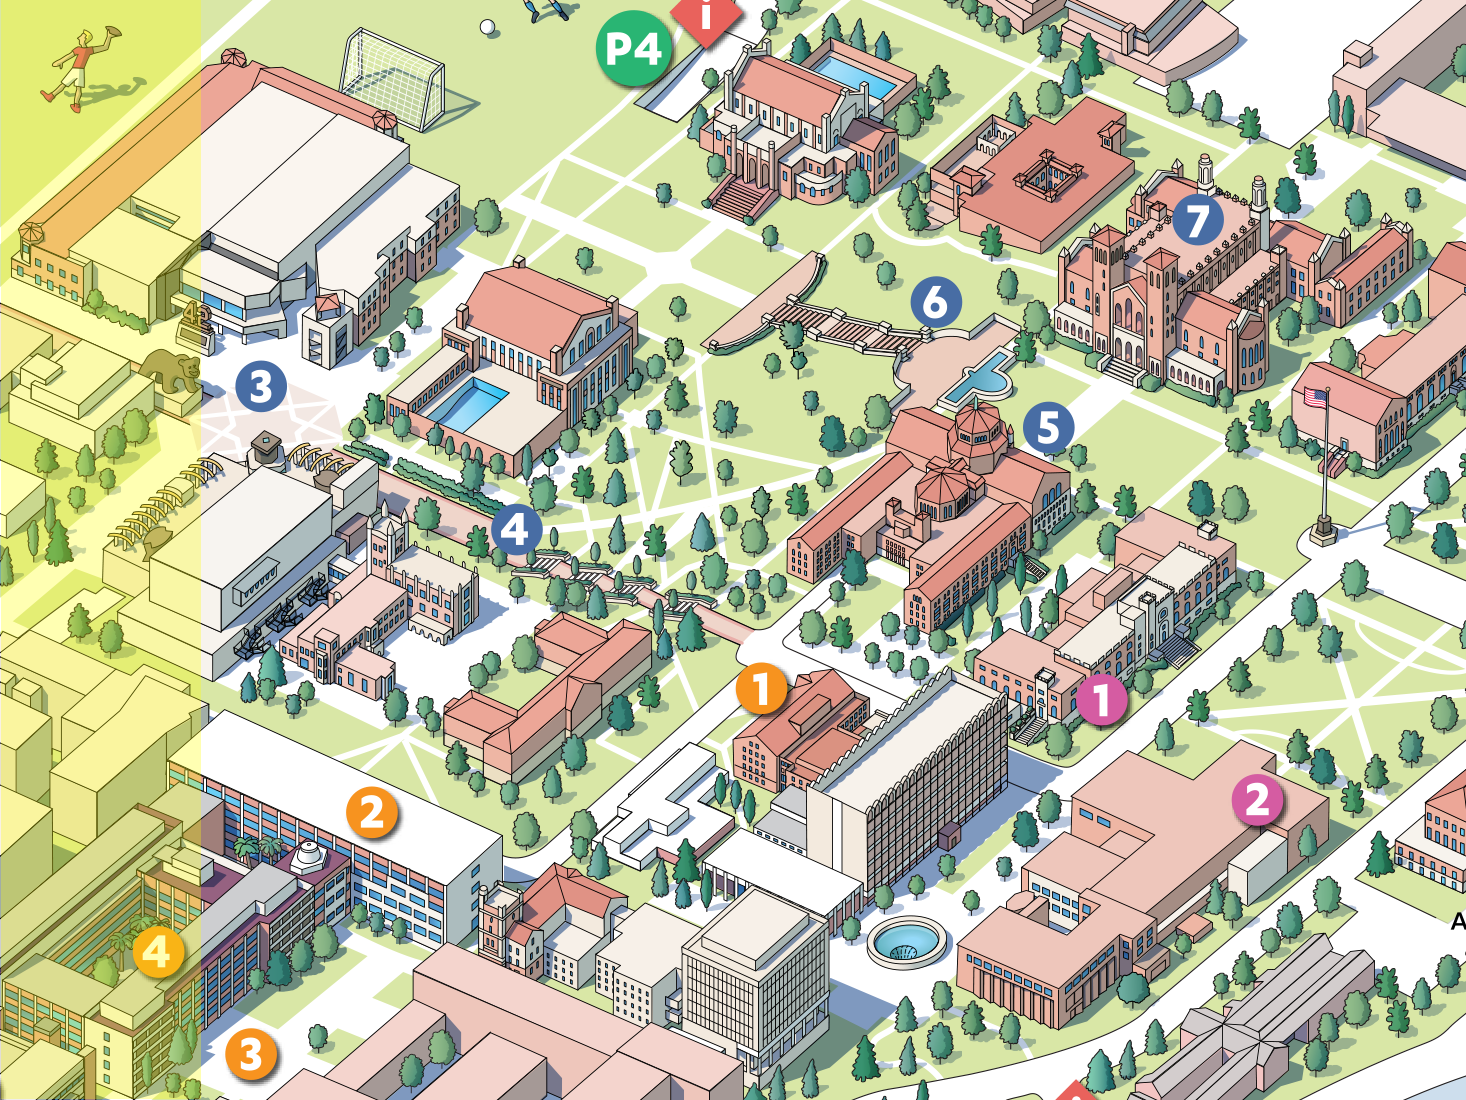 An image of an illustrated map of campus